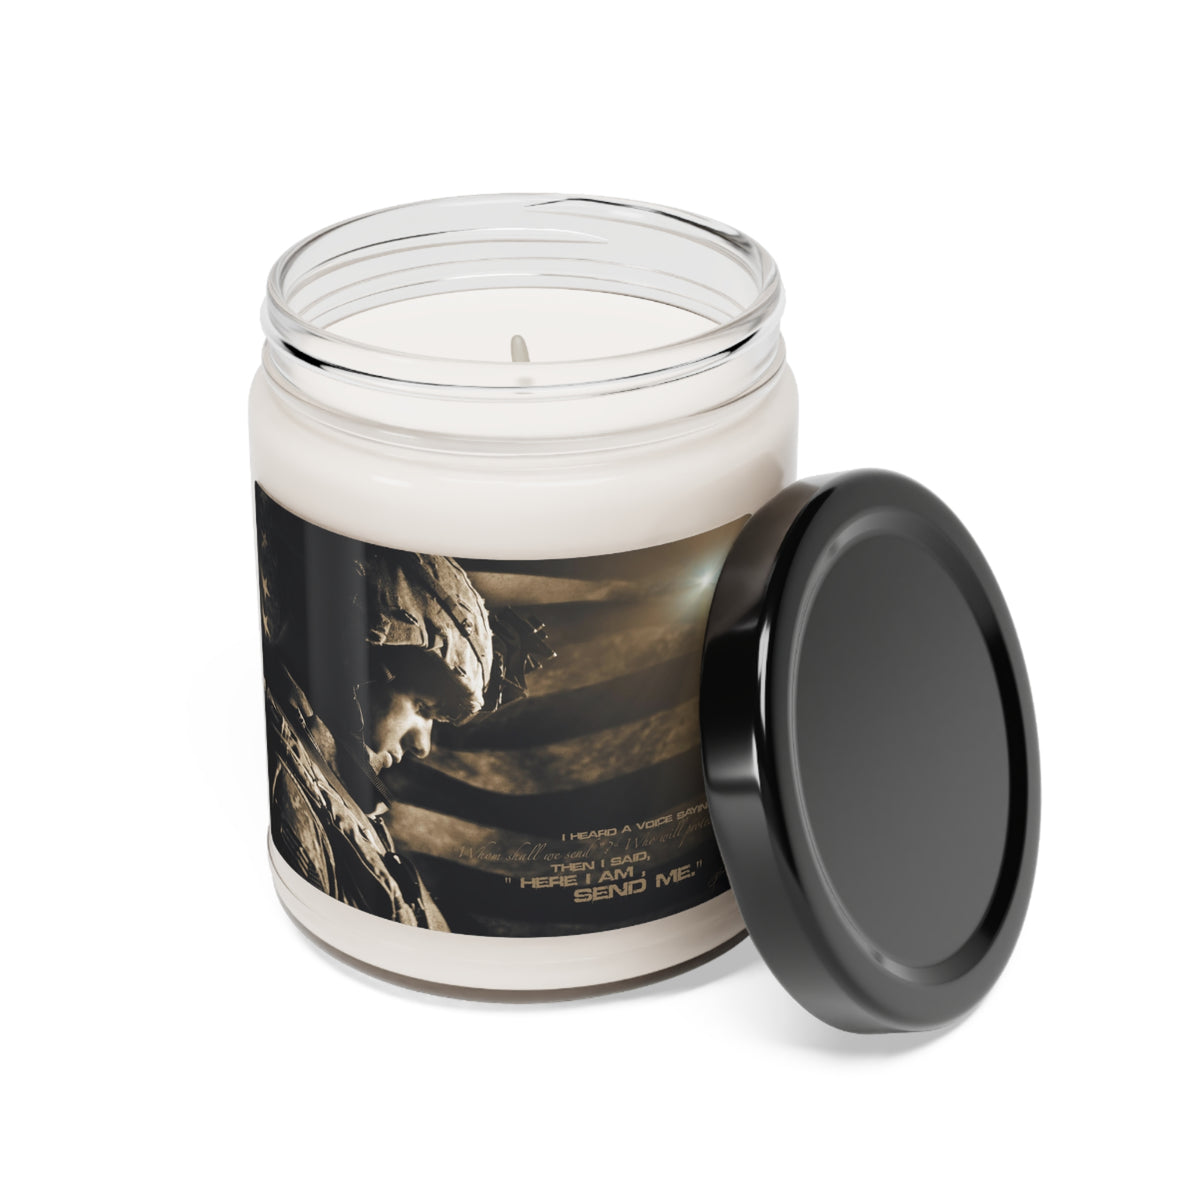 Send Me Military 9oz Scented Soy Candle